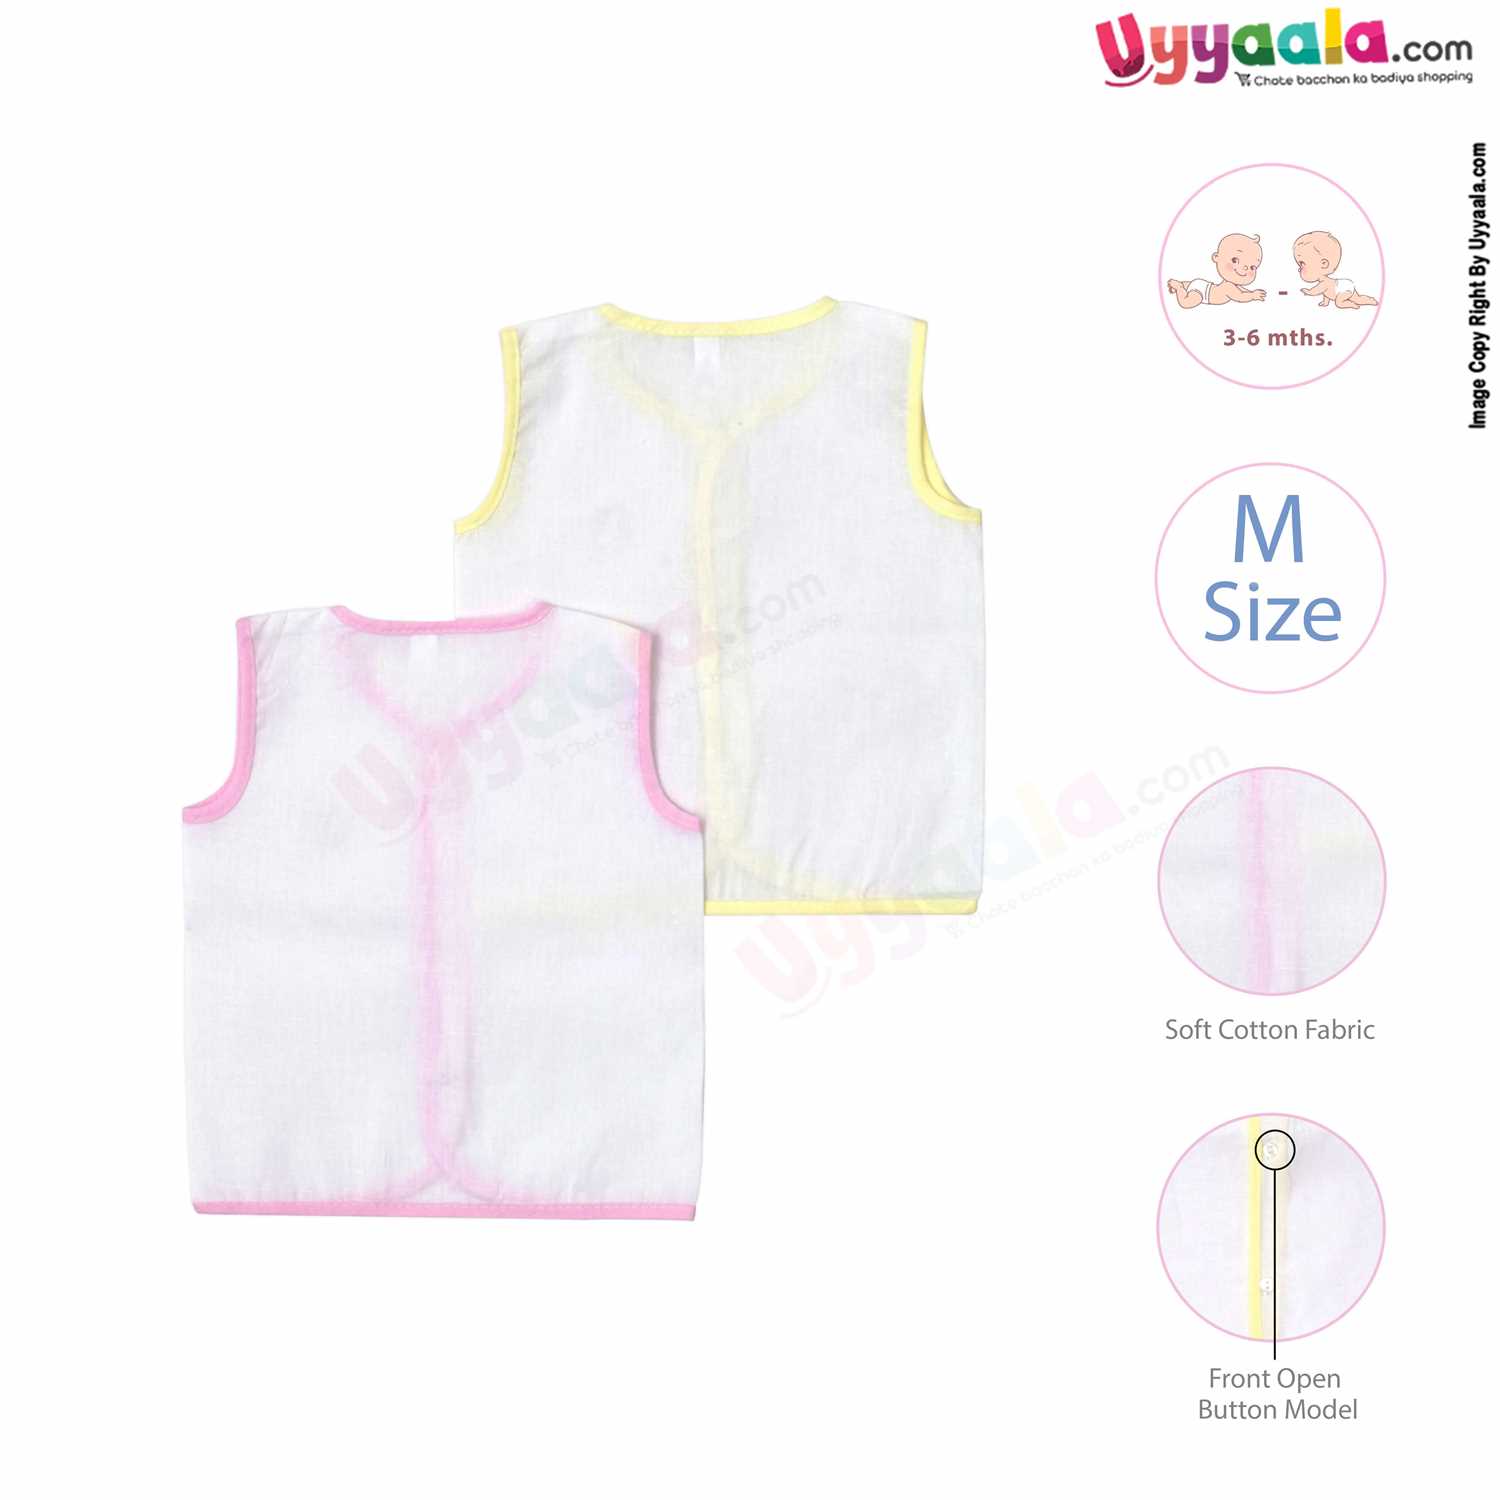 POLAR CUBS Sleeveless Baby Jabla Set, Front Opening Button Model, Premium Quality Cotton Baby Wear, (3-6M), 2Pack - White with Pink & Yellow Borders